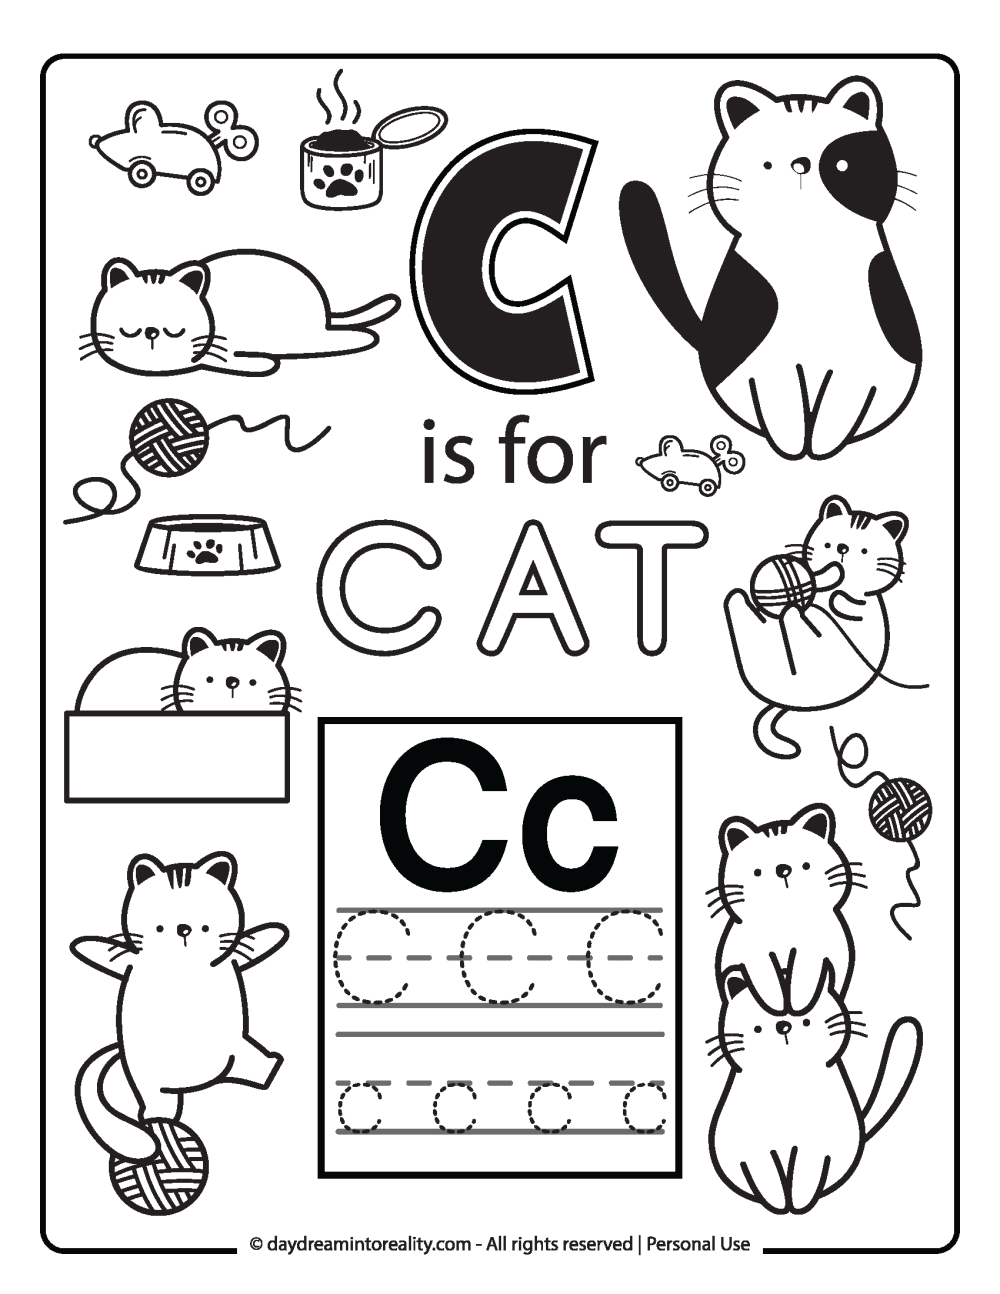 Letter C coloring page free printable - c is for cat